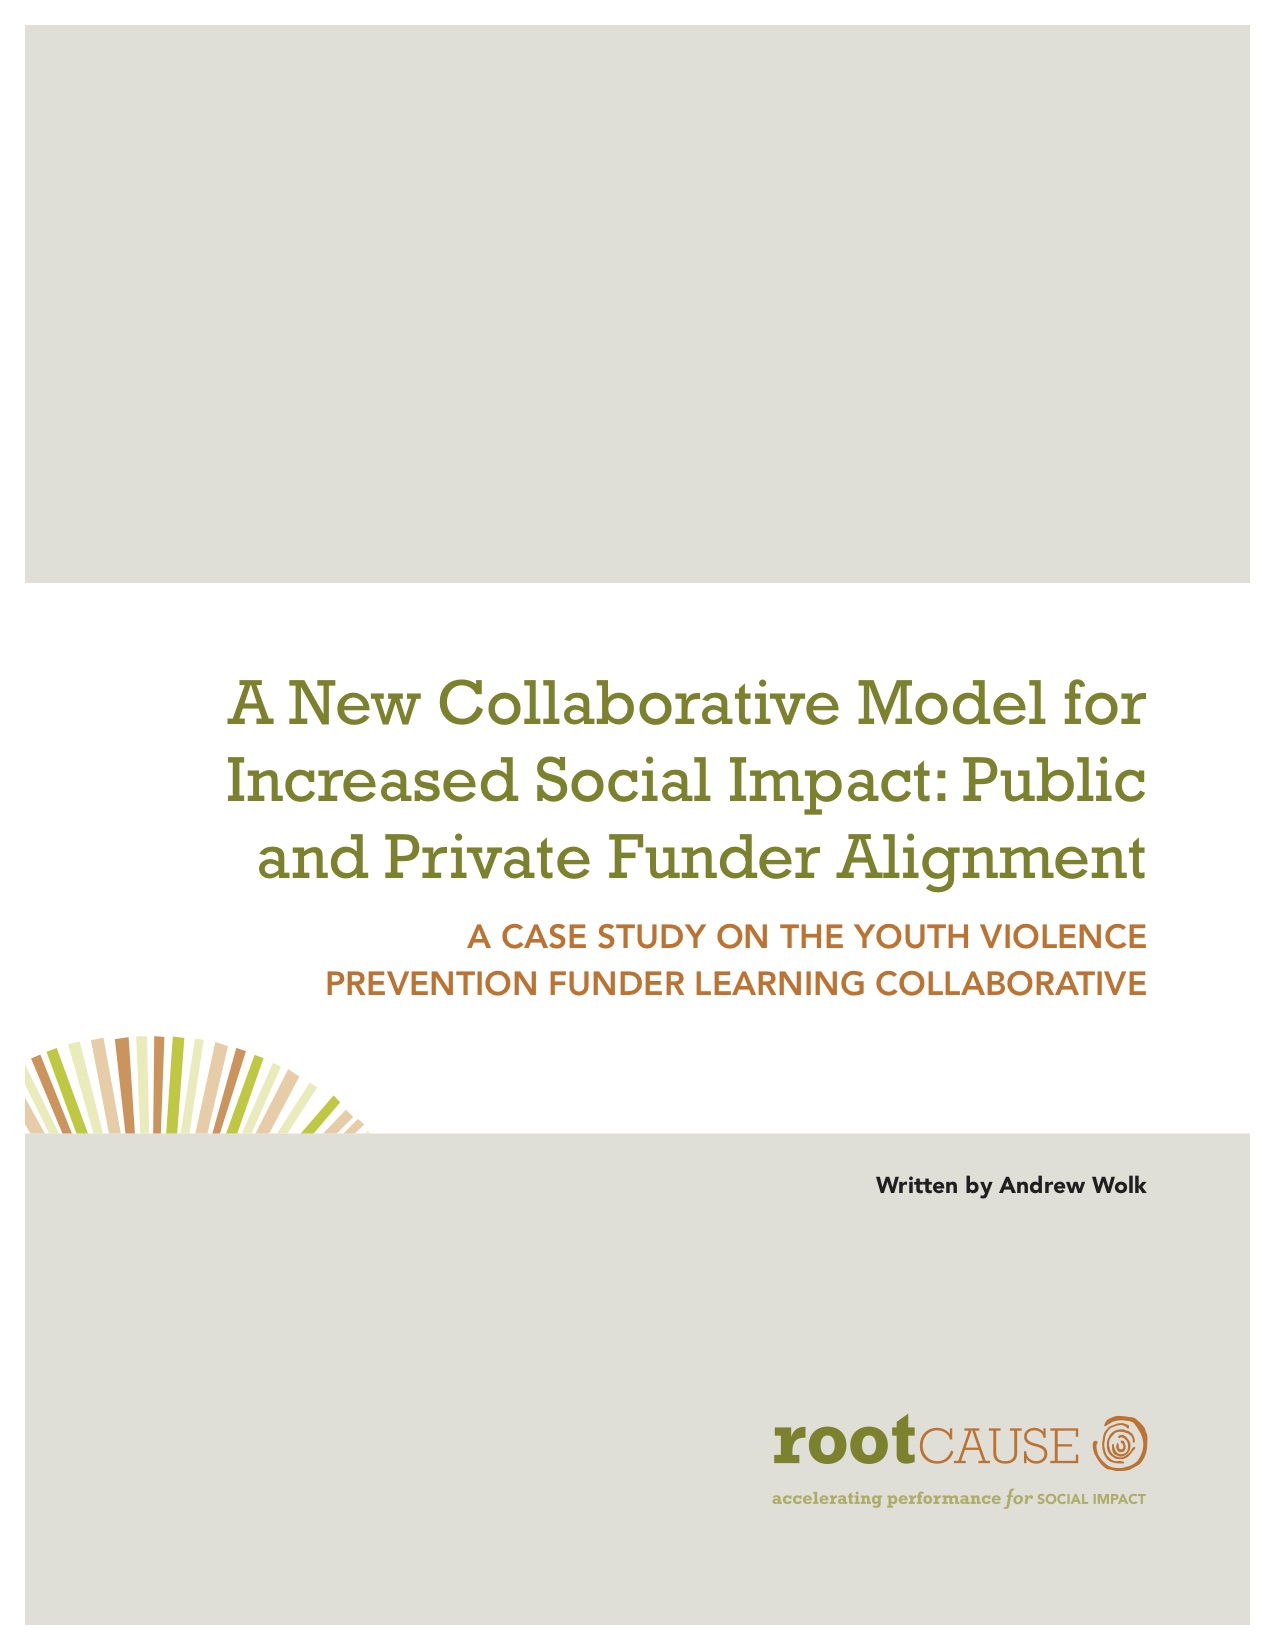 A New Collaborative Model for Increased Social Impact: Public and Private Funder Alignment